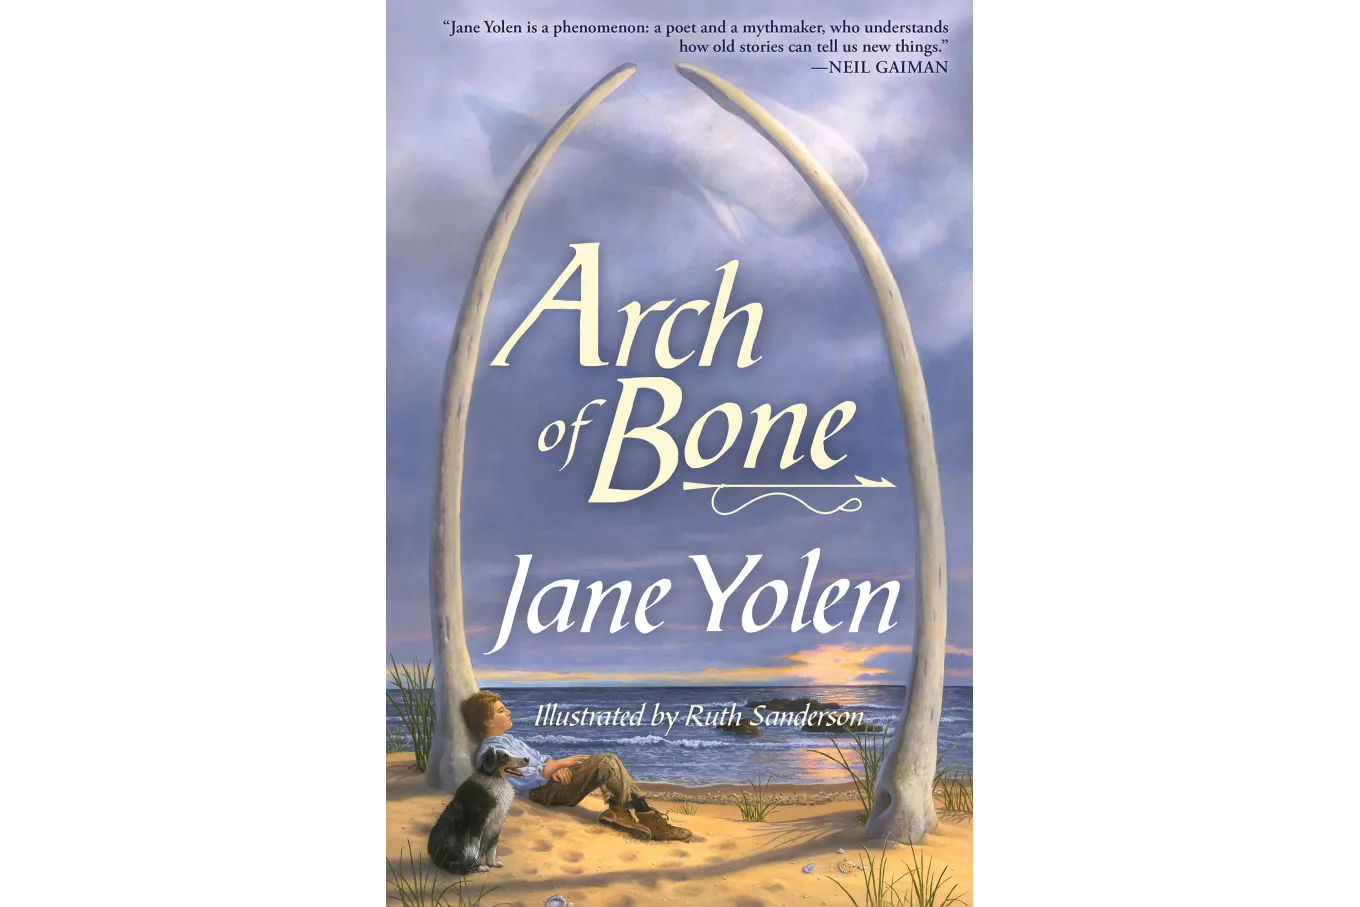 Book cover of Jane Yolen's Arch of Bone